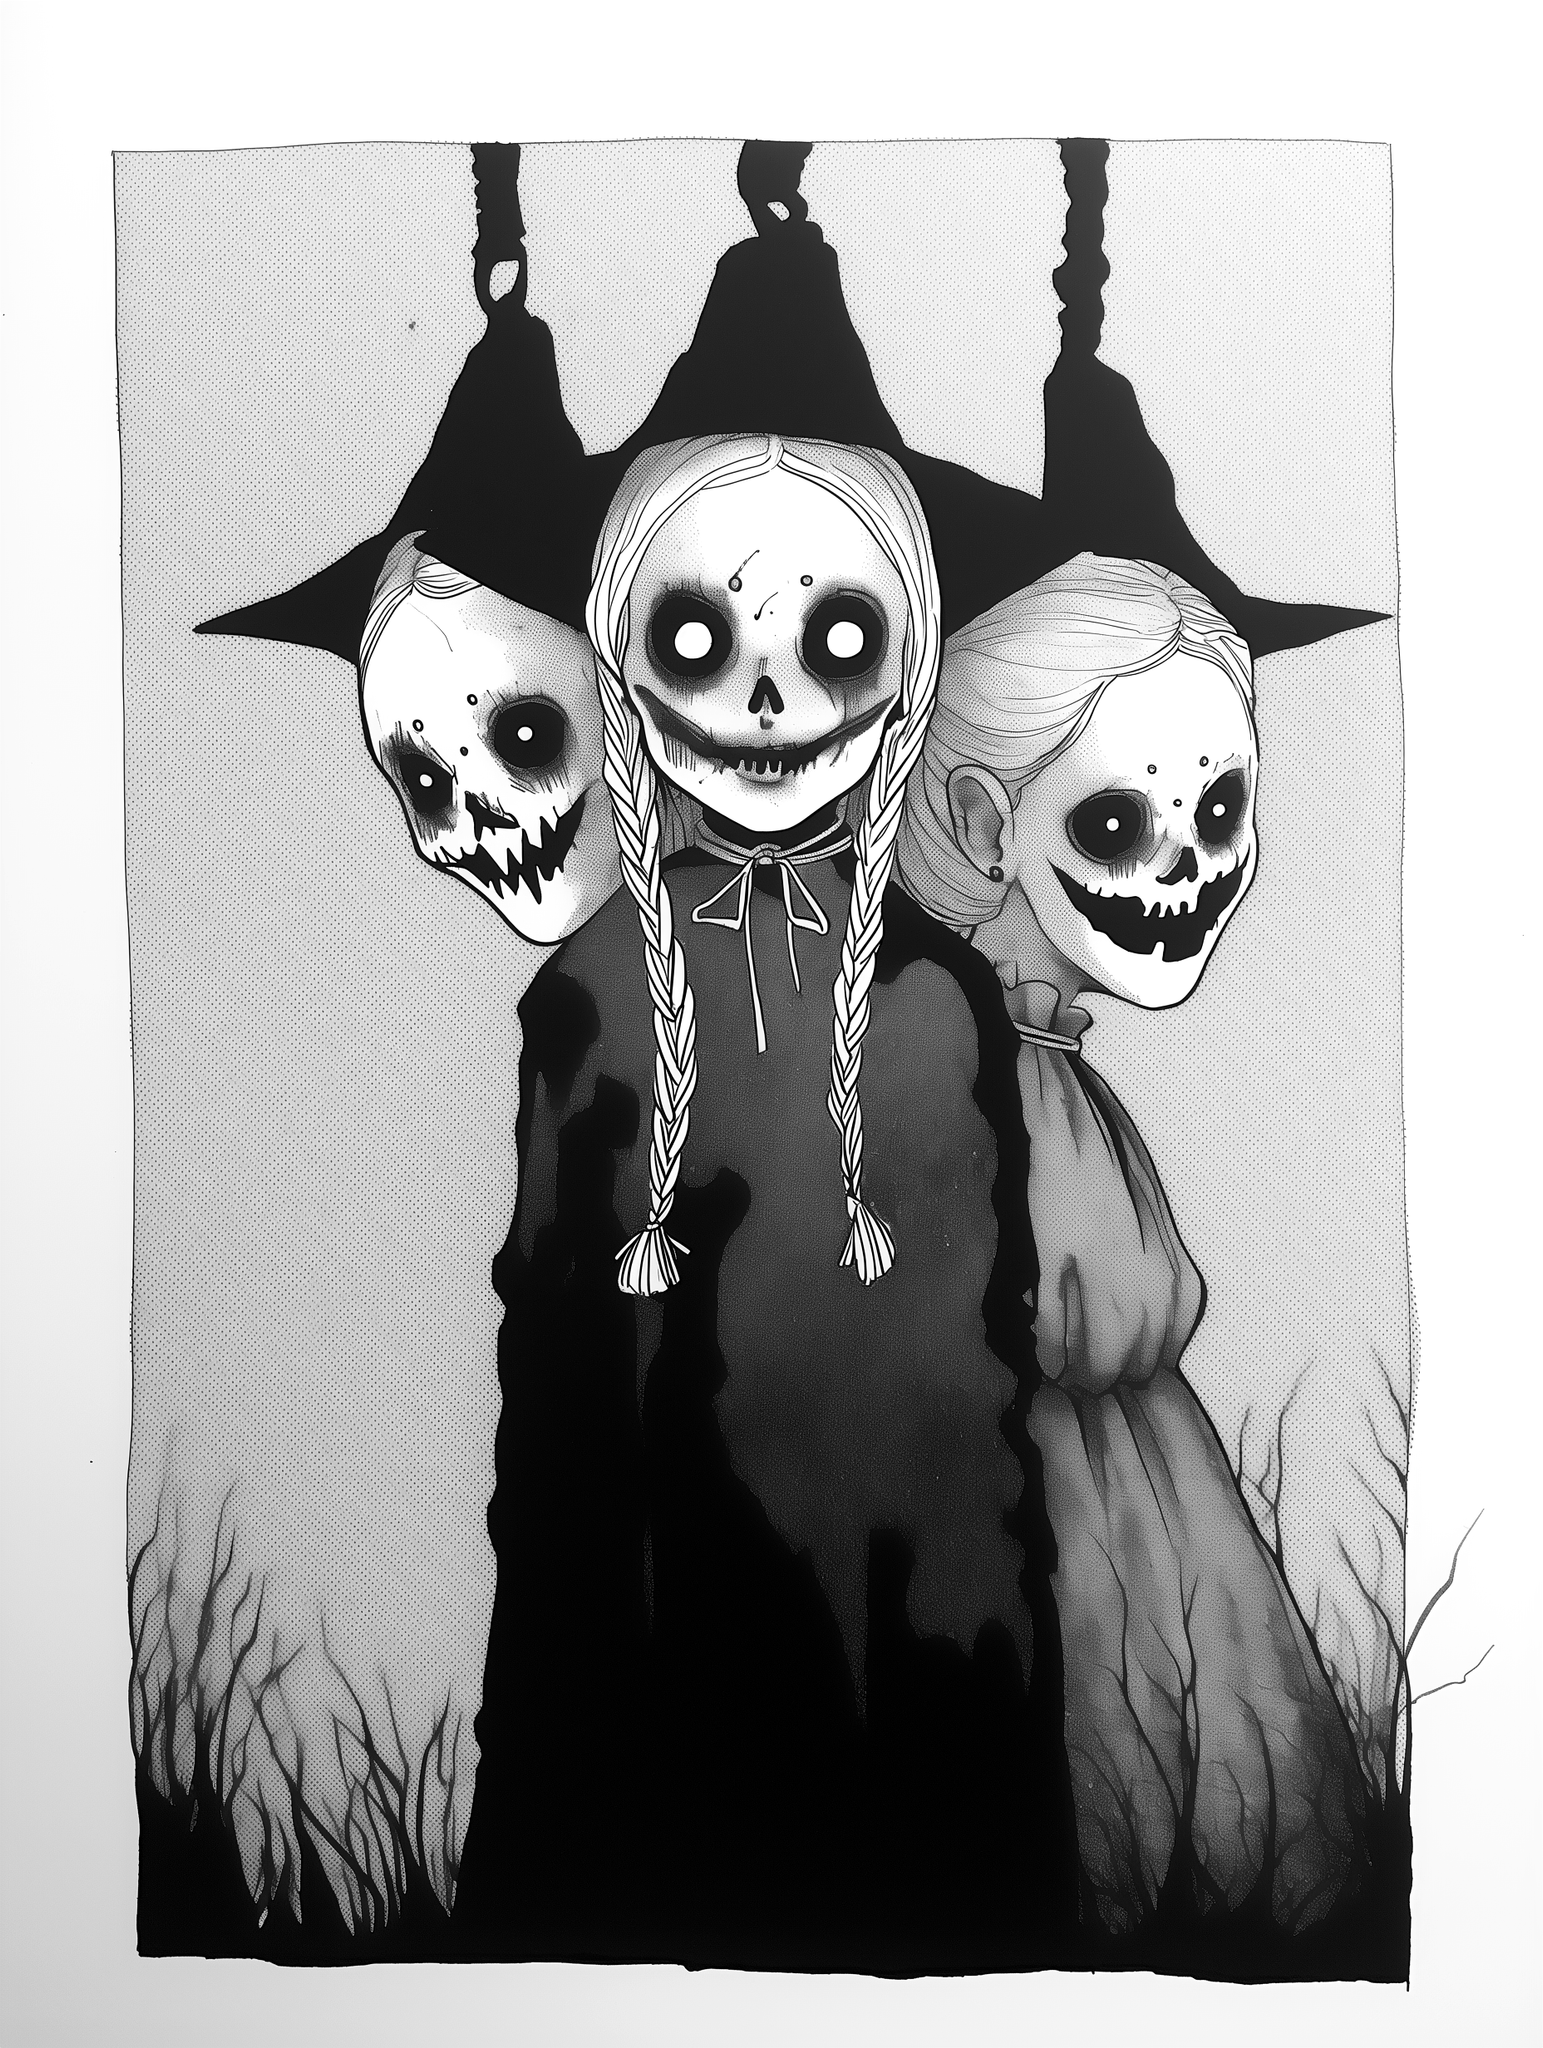 The witches of Salem. Concept VI - Sketch artwork. Dark Series II. Art print and poster. Artwork Gothic home decor gift.